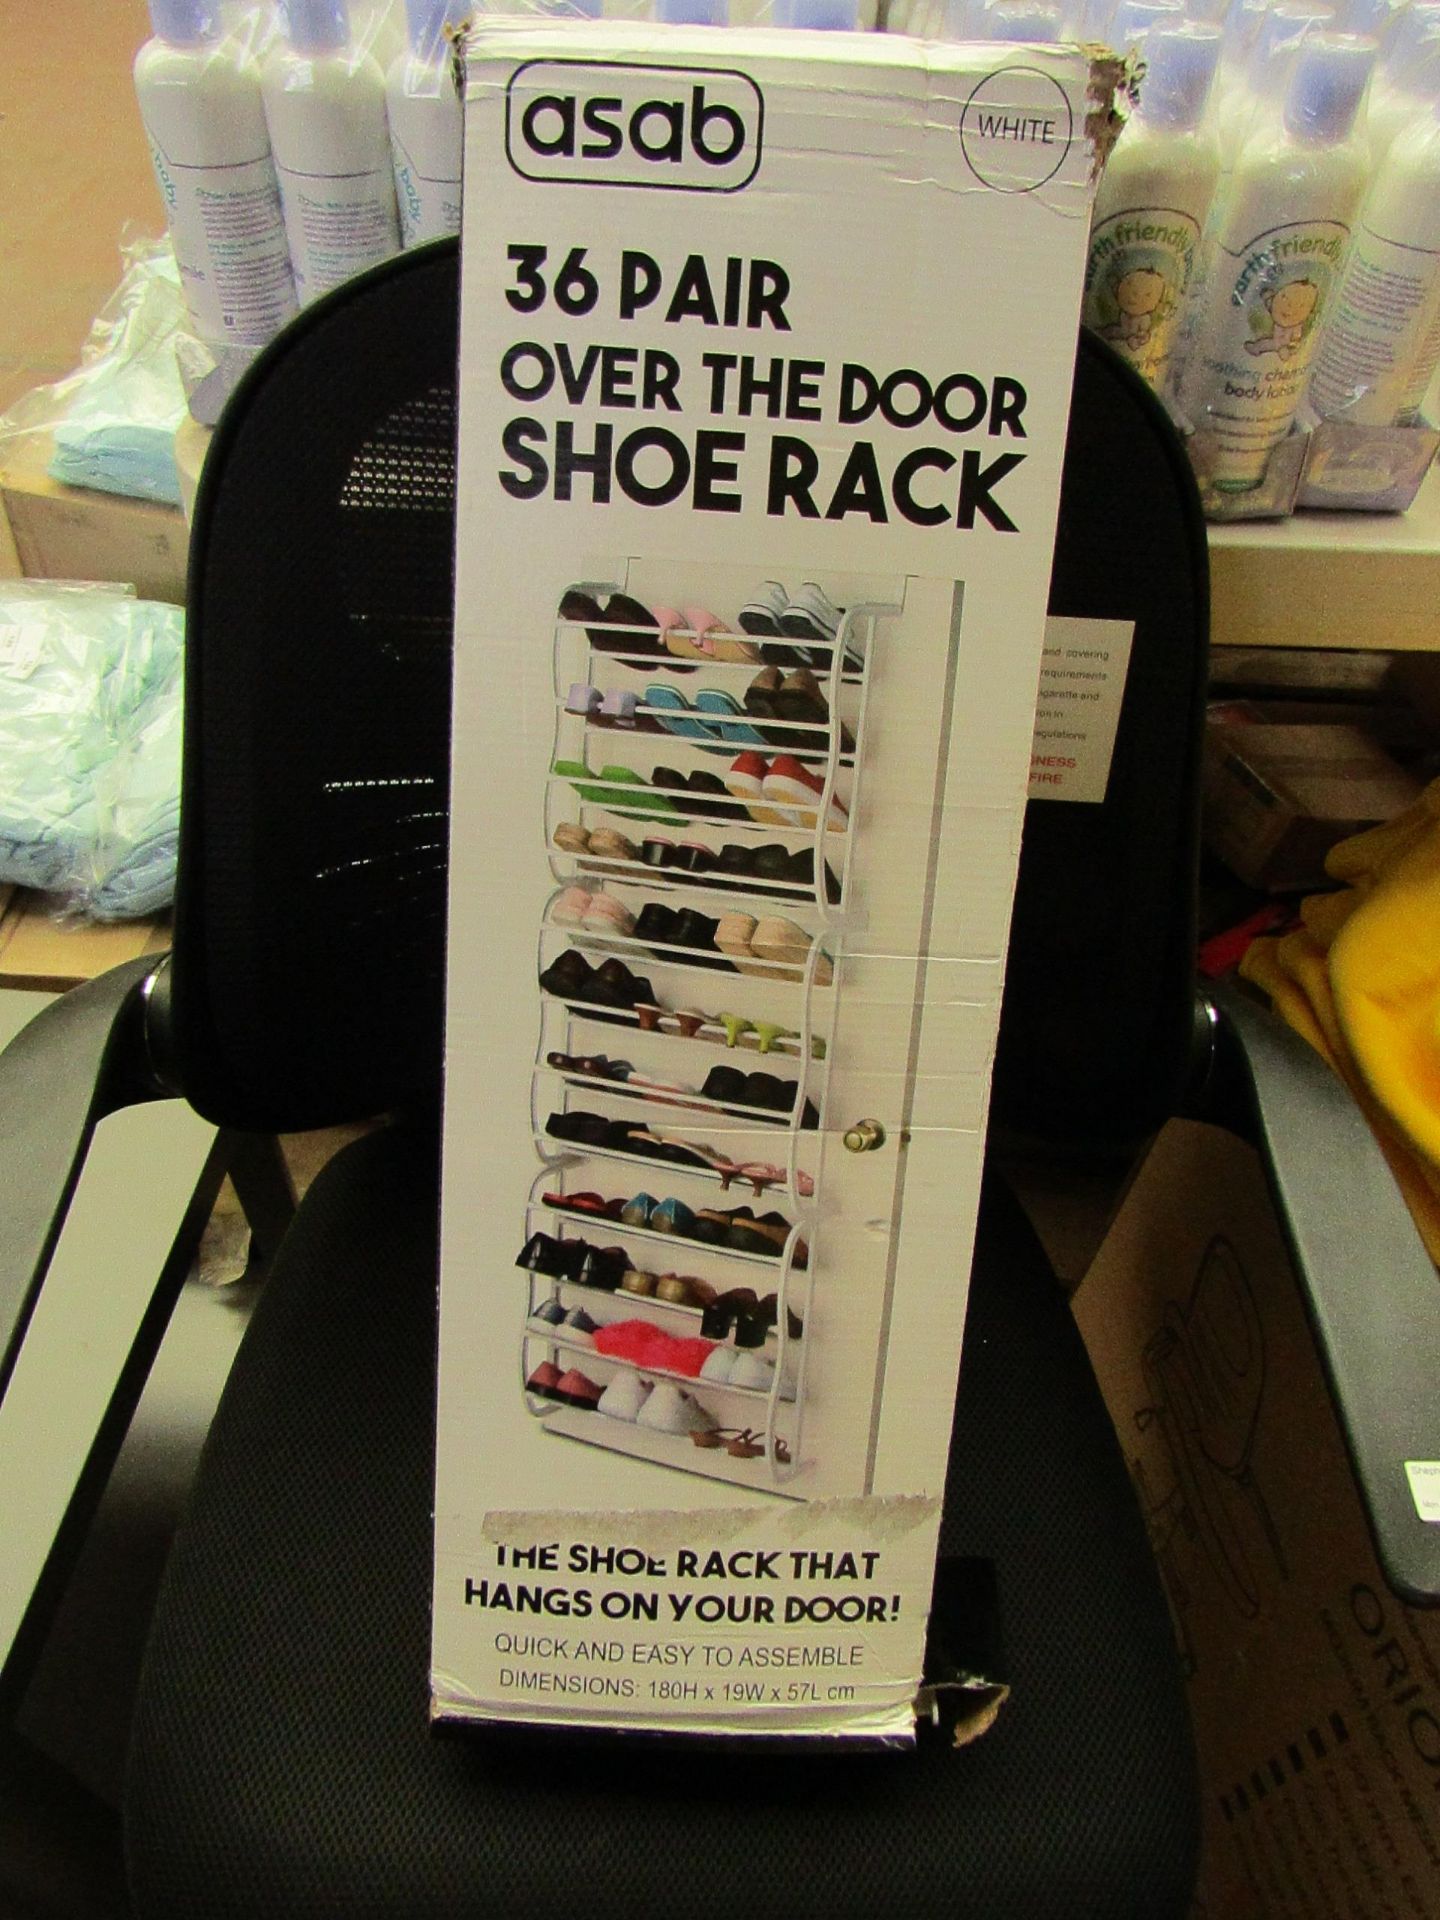 Asab 36 pair over the Door Shoe Rack. Boxed but unchecked